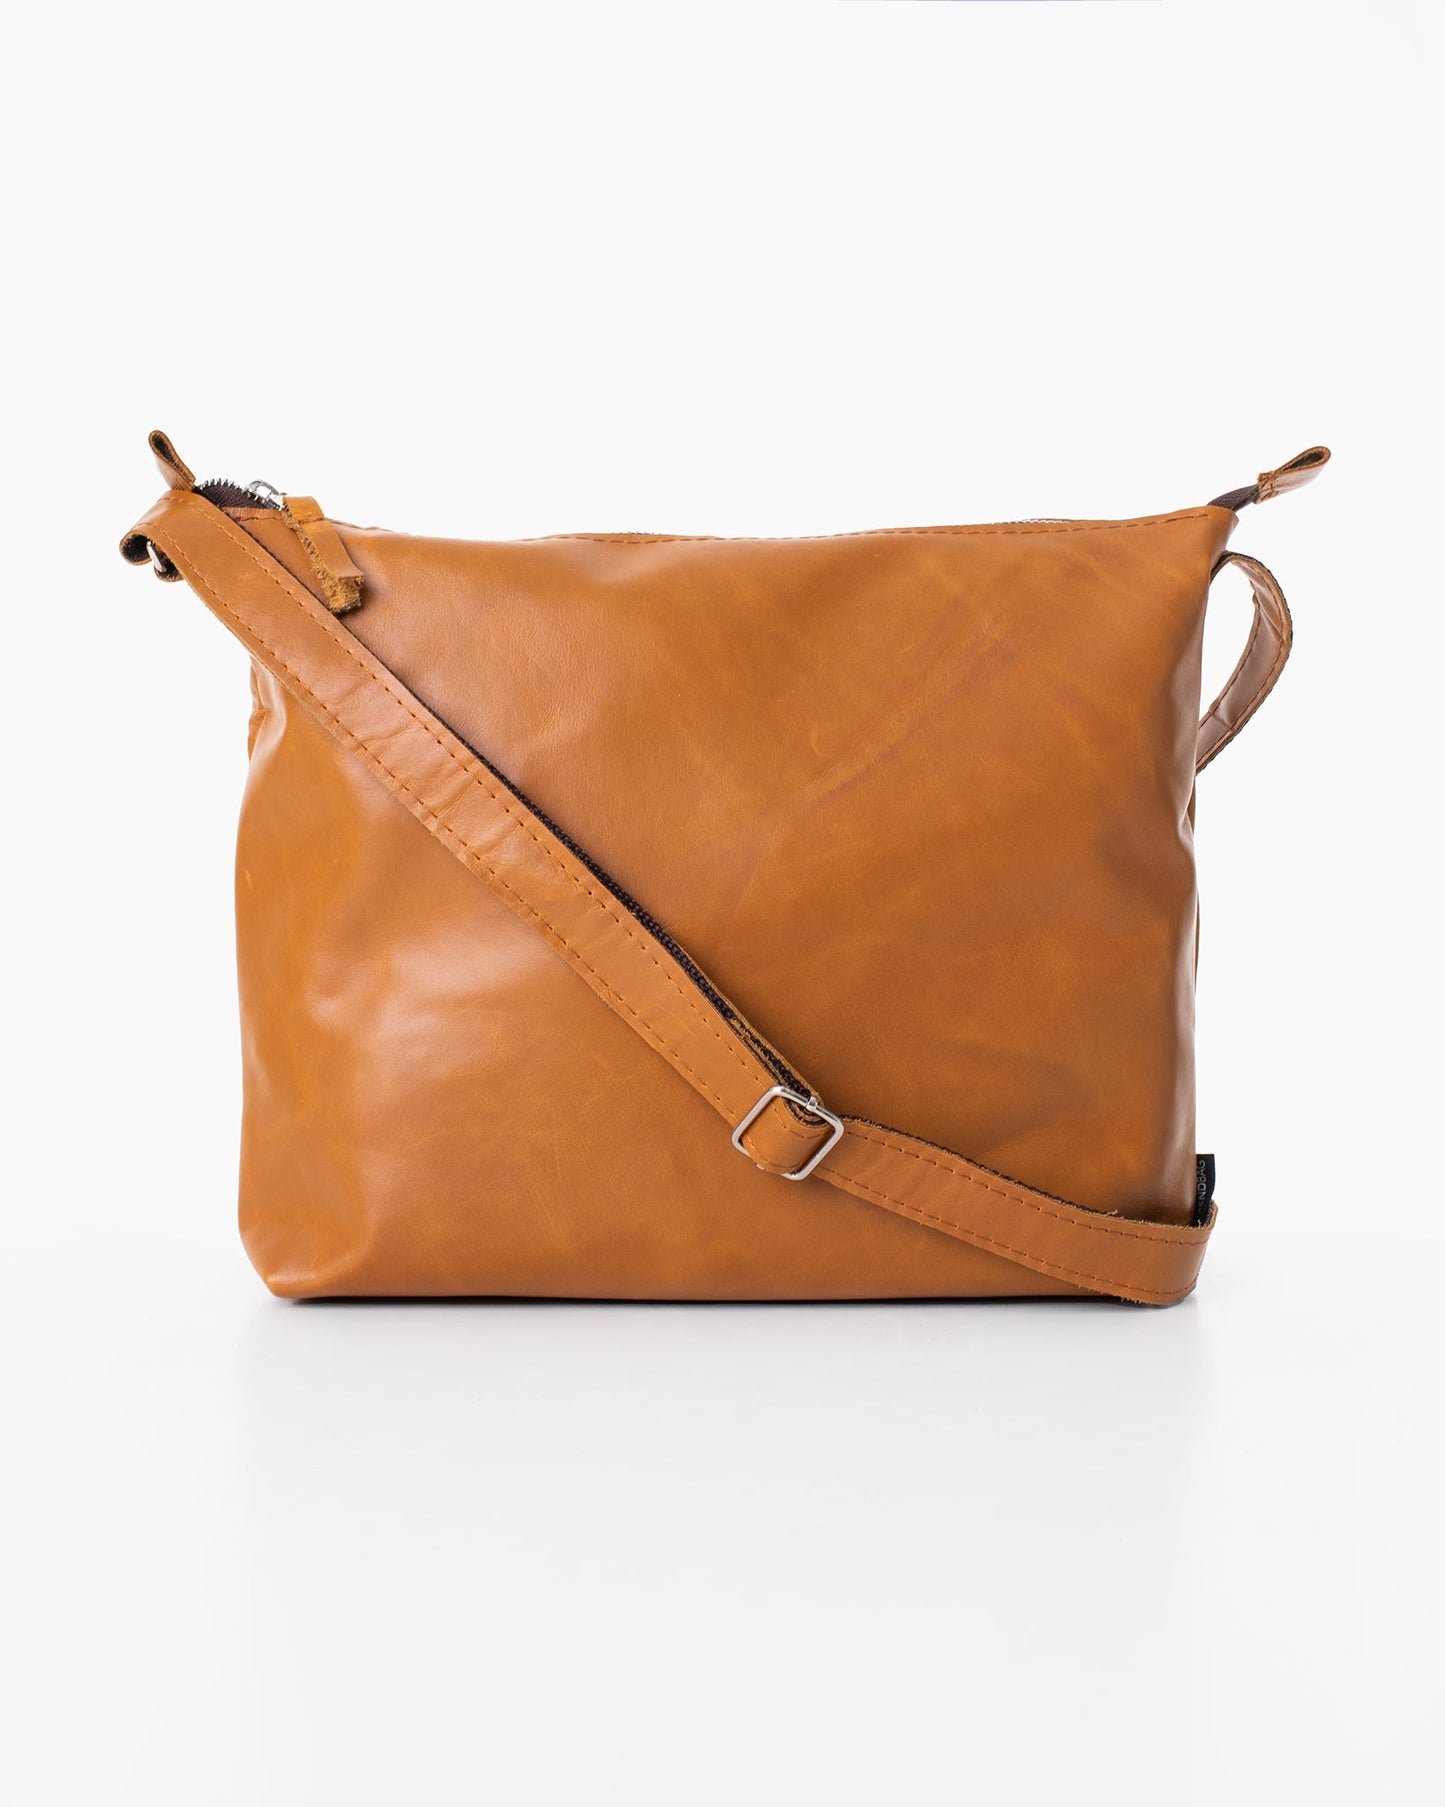 Handmade Anet L shoulder bag crafted from furniture industry leftovers, showcasing brown leather with a strap. Unique, eco-friendly design from Estonia.